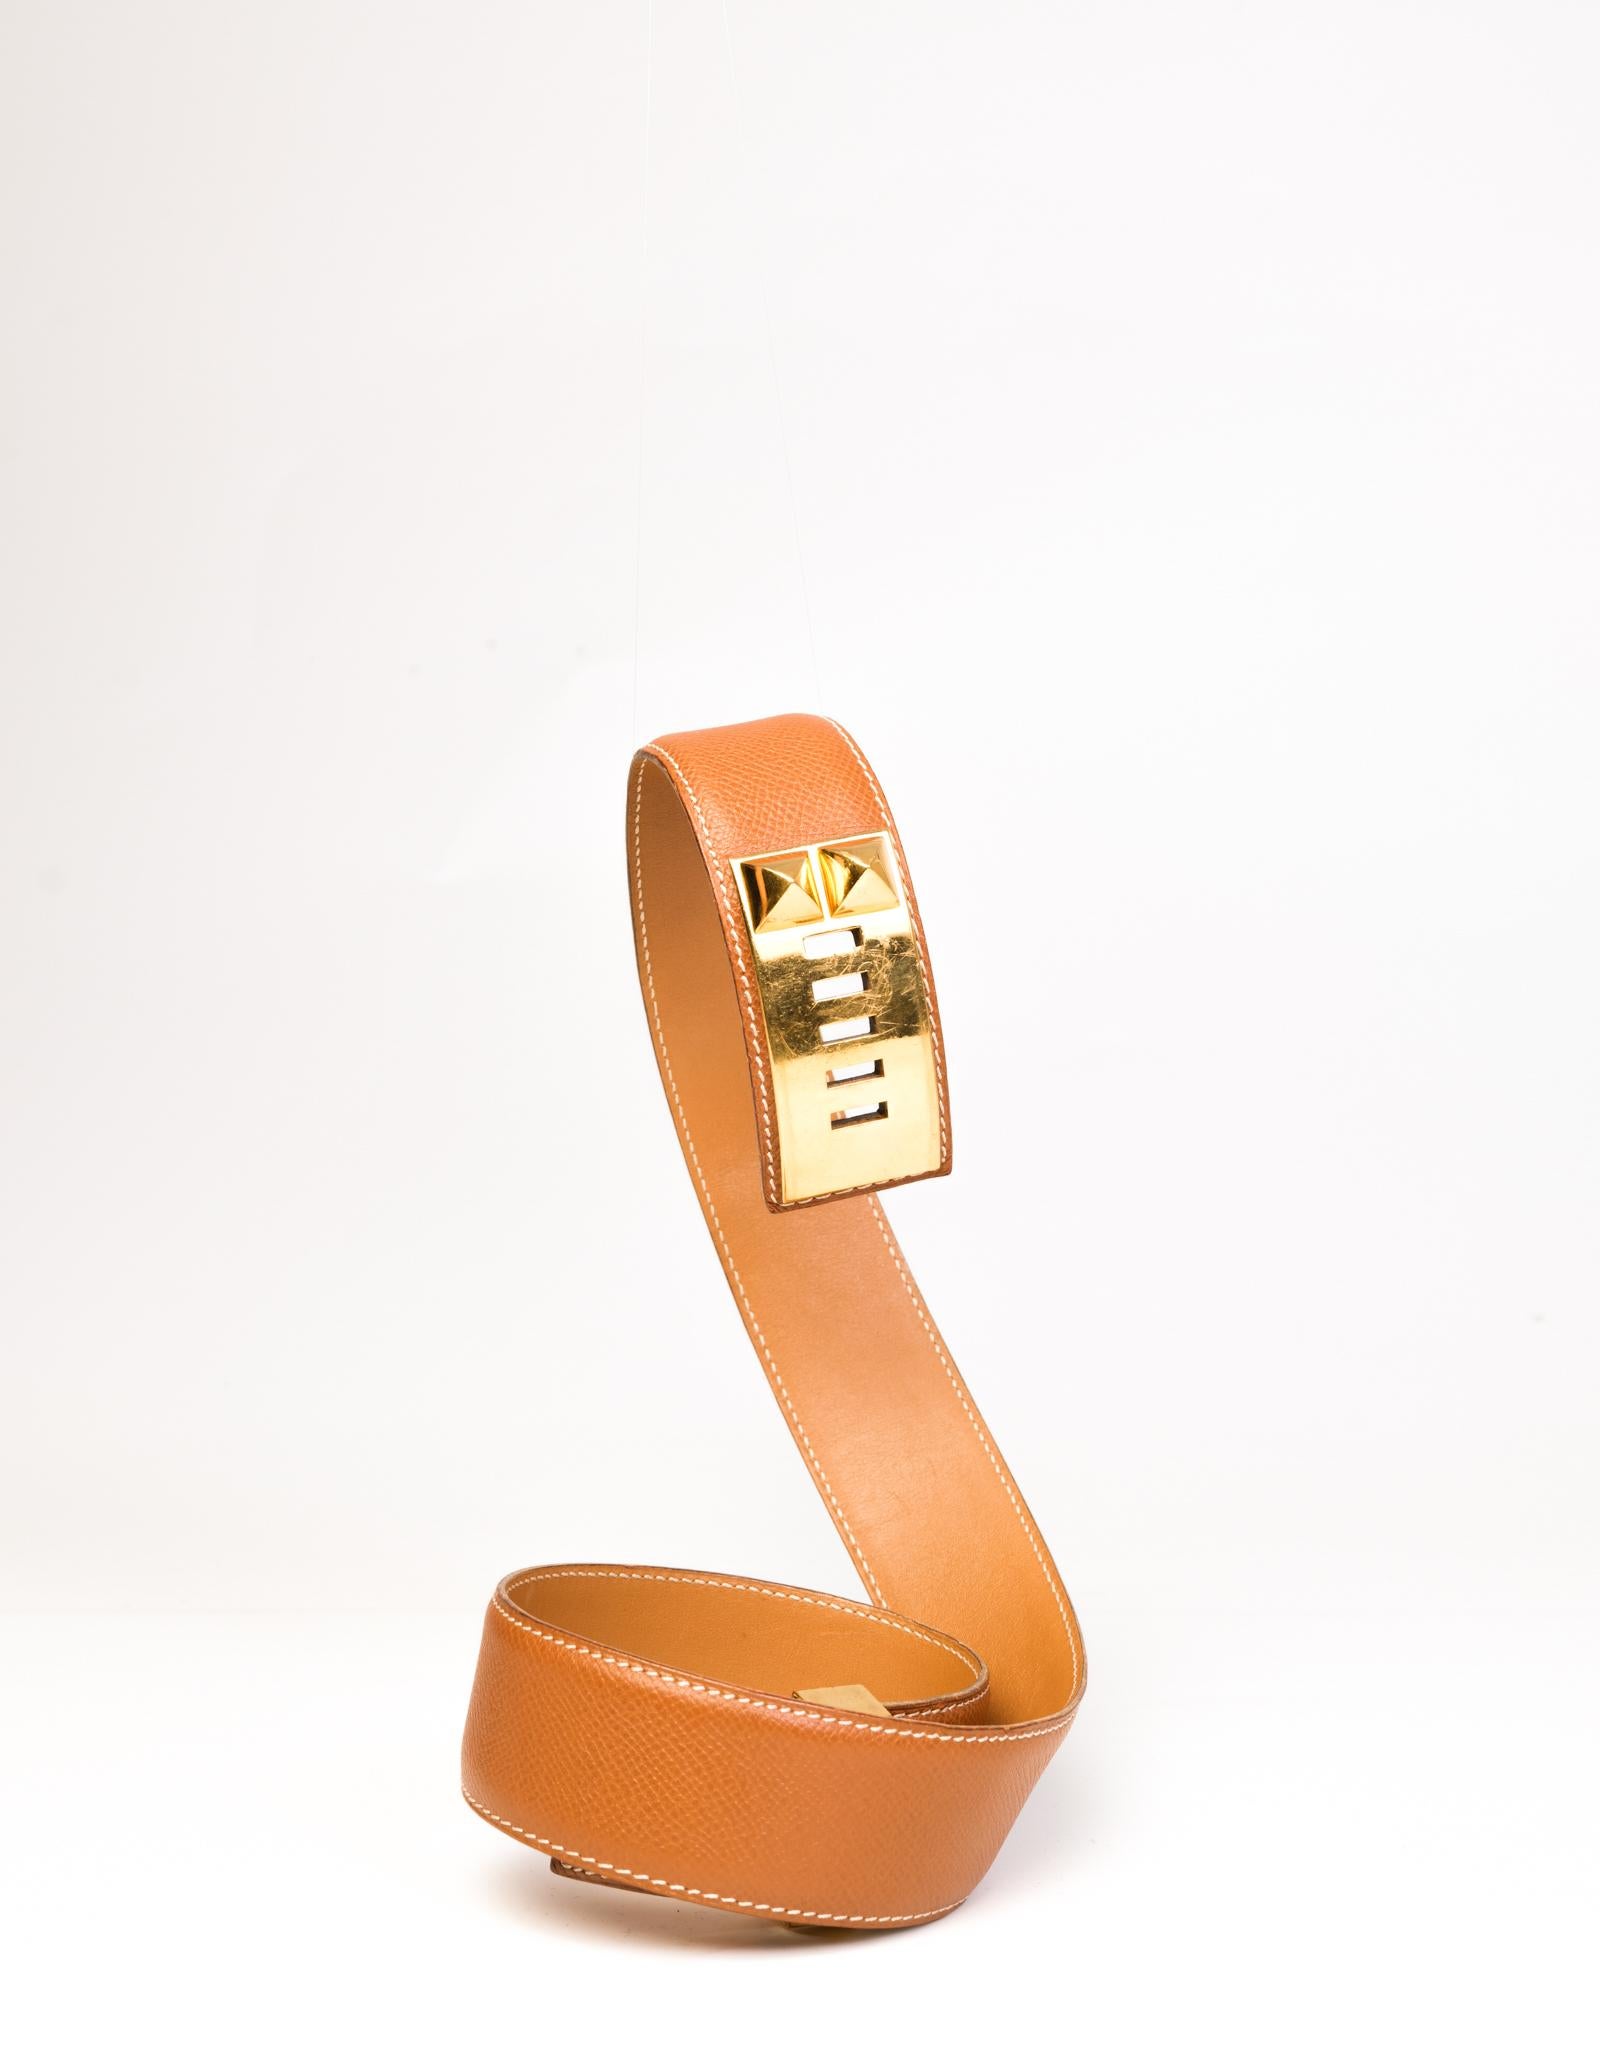 Hermès Collier de Chien belt made with a Gold Epsom leather with white contrast stitching and gold tone hardware.

COLOR: Tan
ITEM CODE: square+
MATERIAL: Leather
MEASURES: L 31” W 1.5”
COMES WITH: Dust bag
CONDITION: Good - belt shows stretching